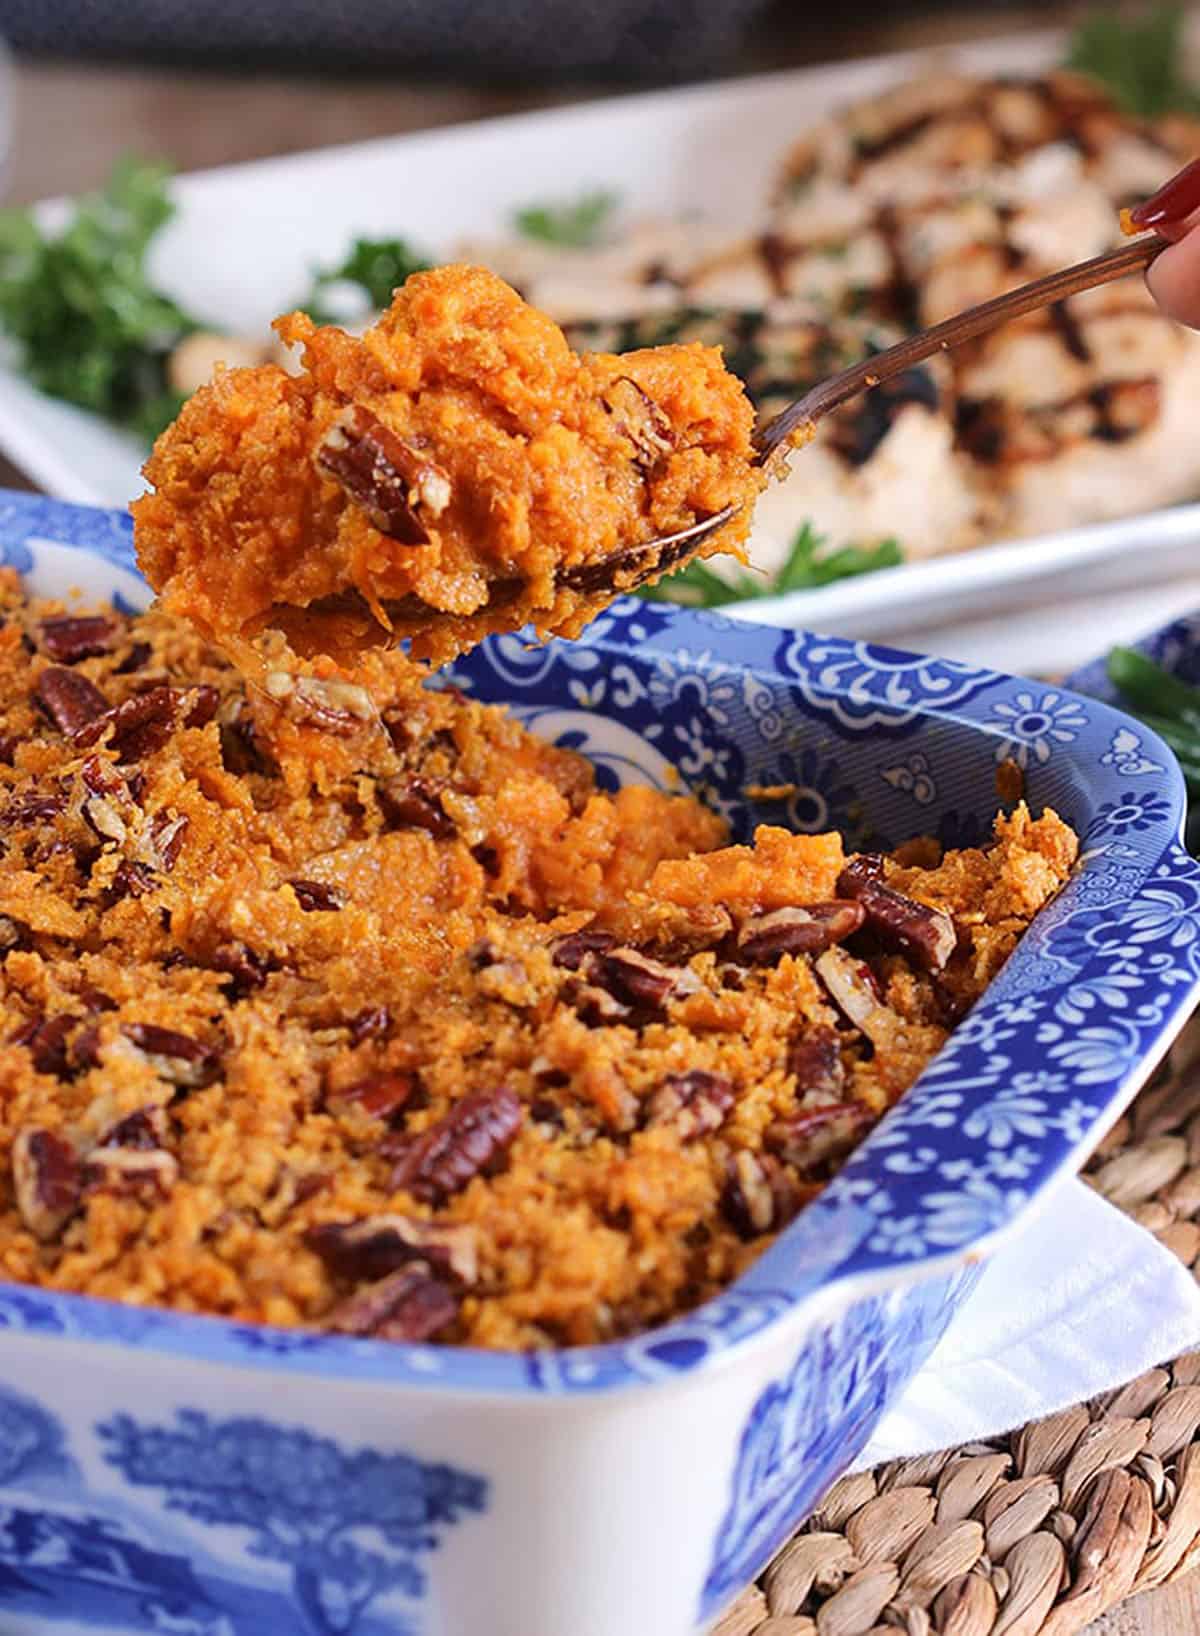 Hand with a serving spoon over a baking dish with sweet potato casserole.